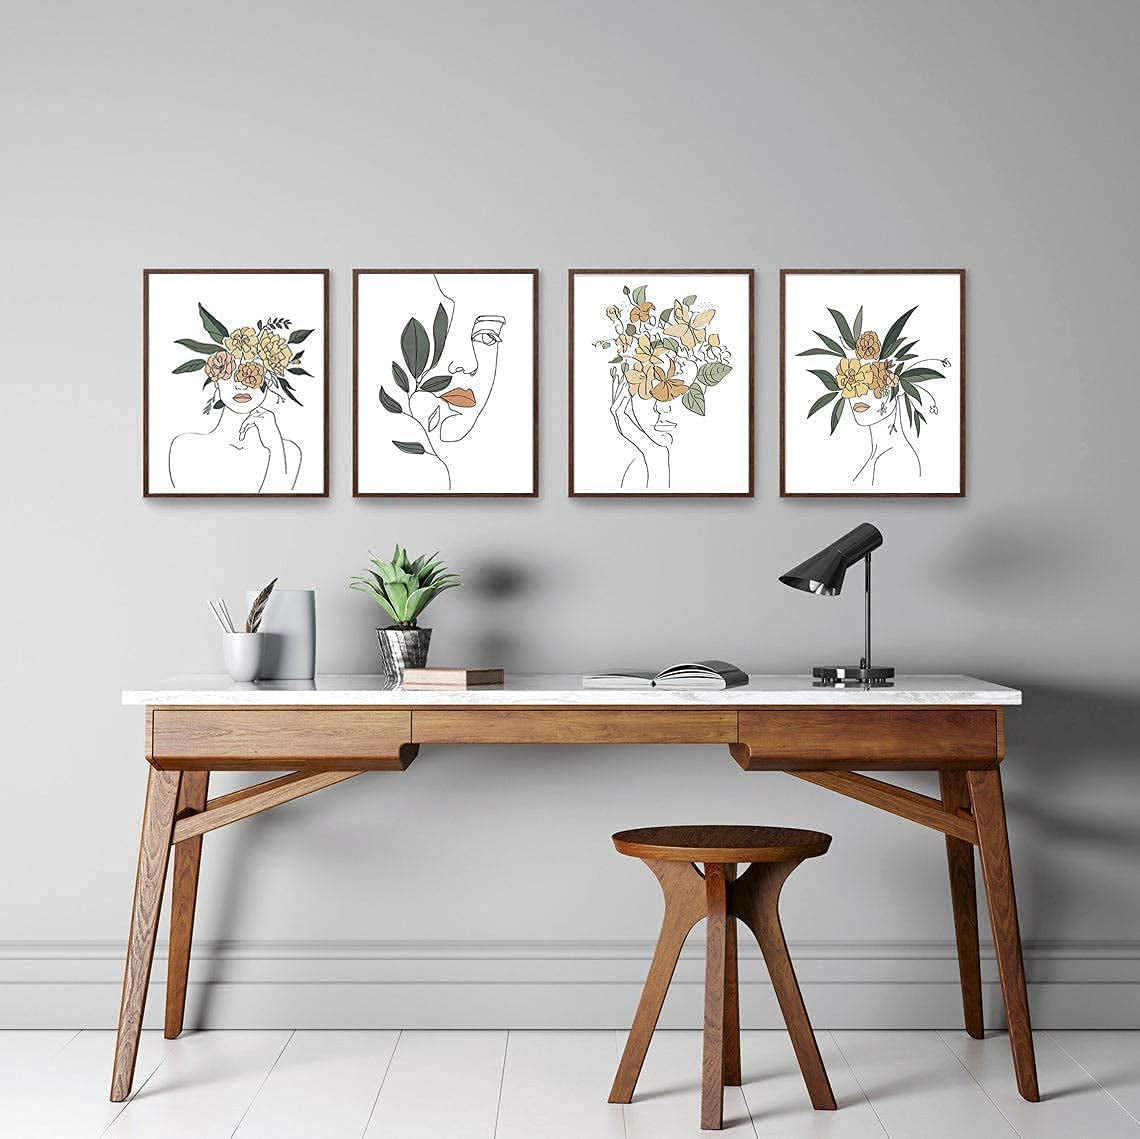  Set of 4 Flower Canvas Wall Art Painting 